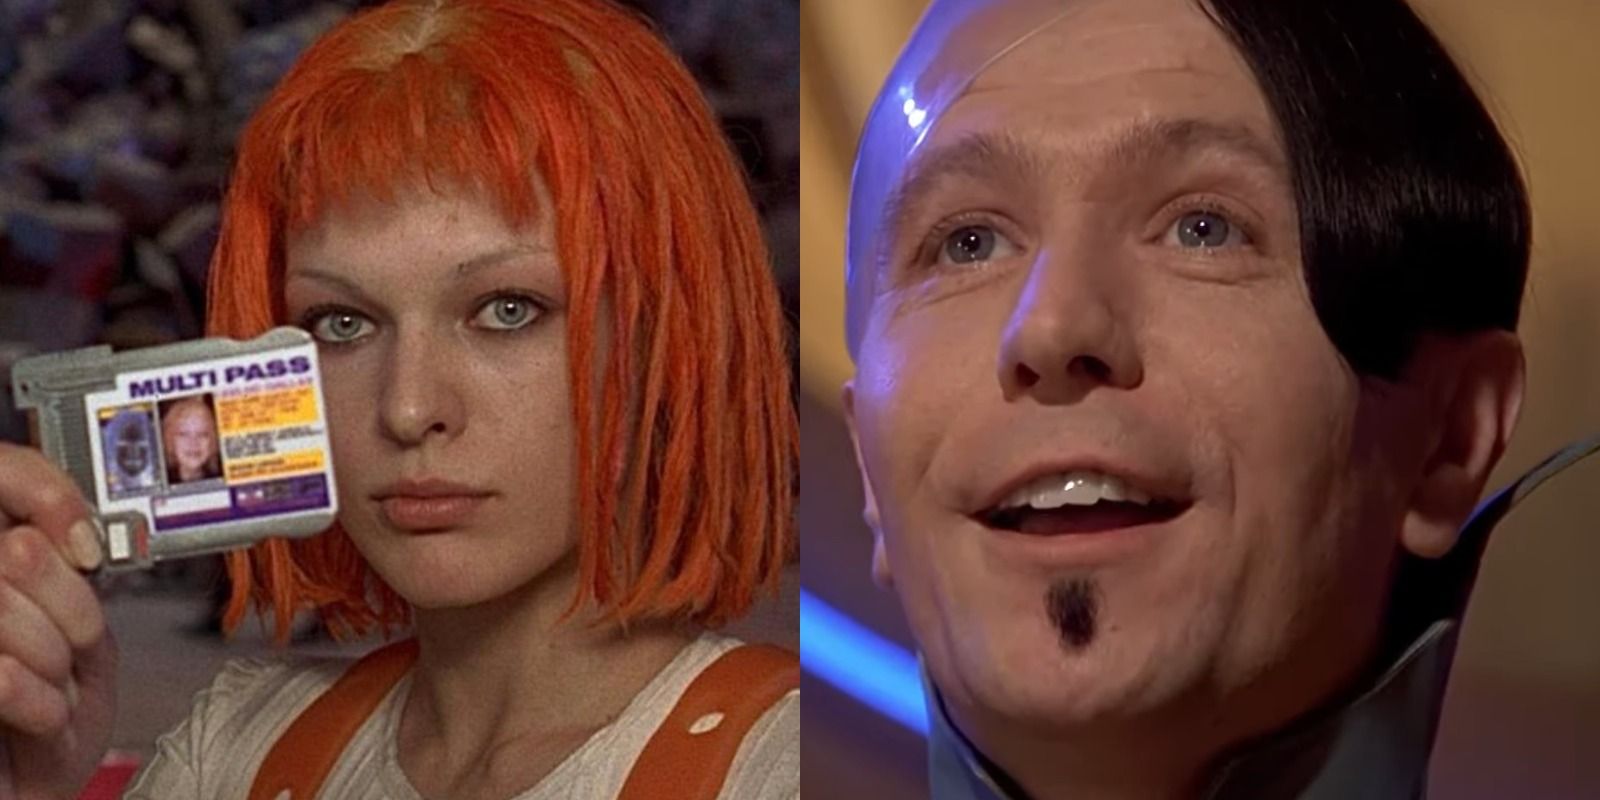 Split image of Leeloo holding her multipass and Zorg speaking with Cornelius in The Fifth Element